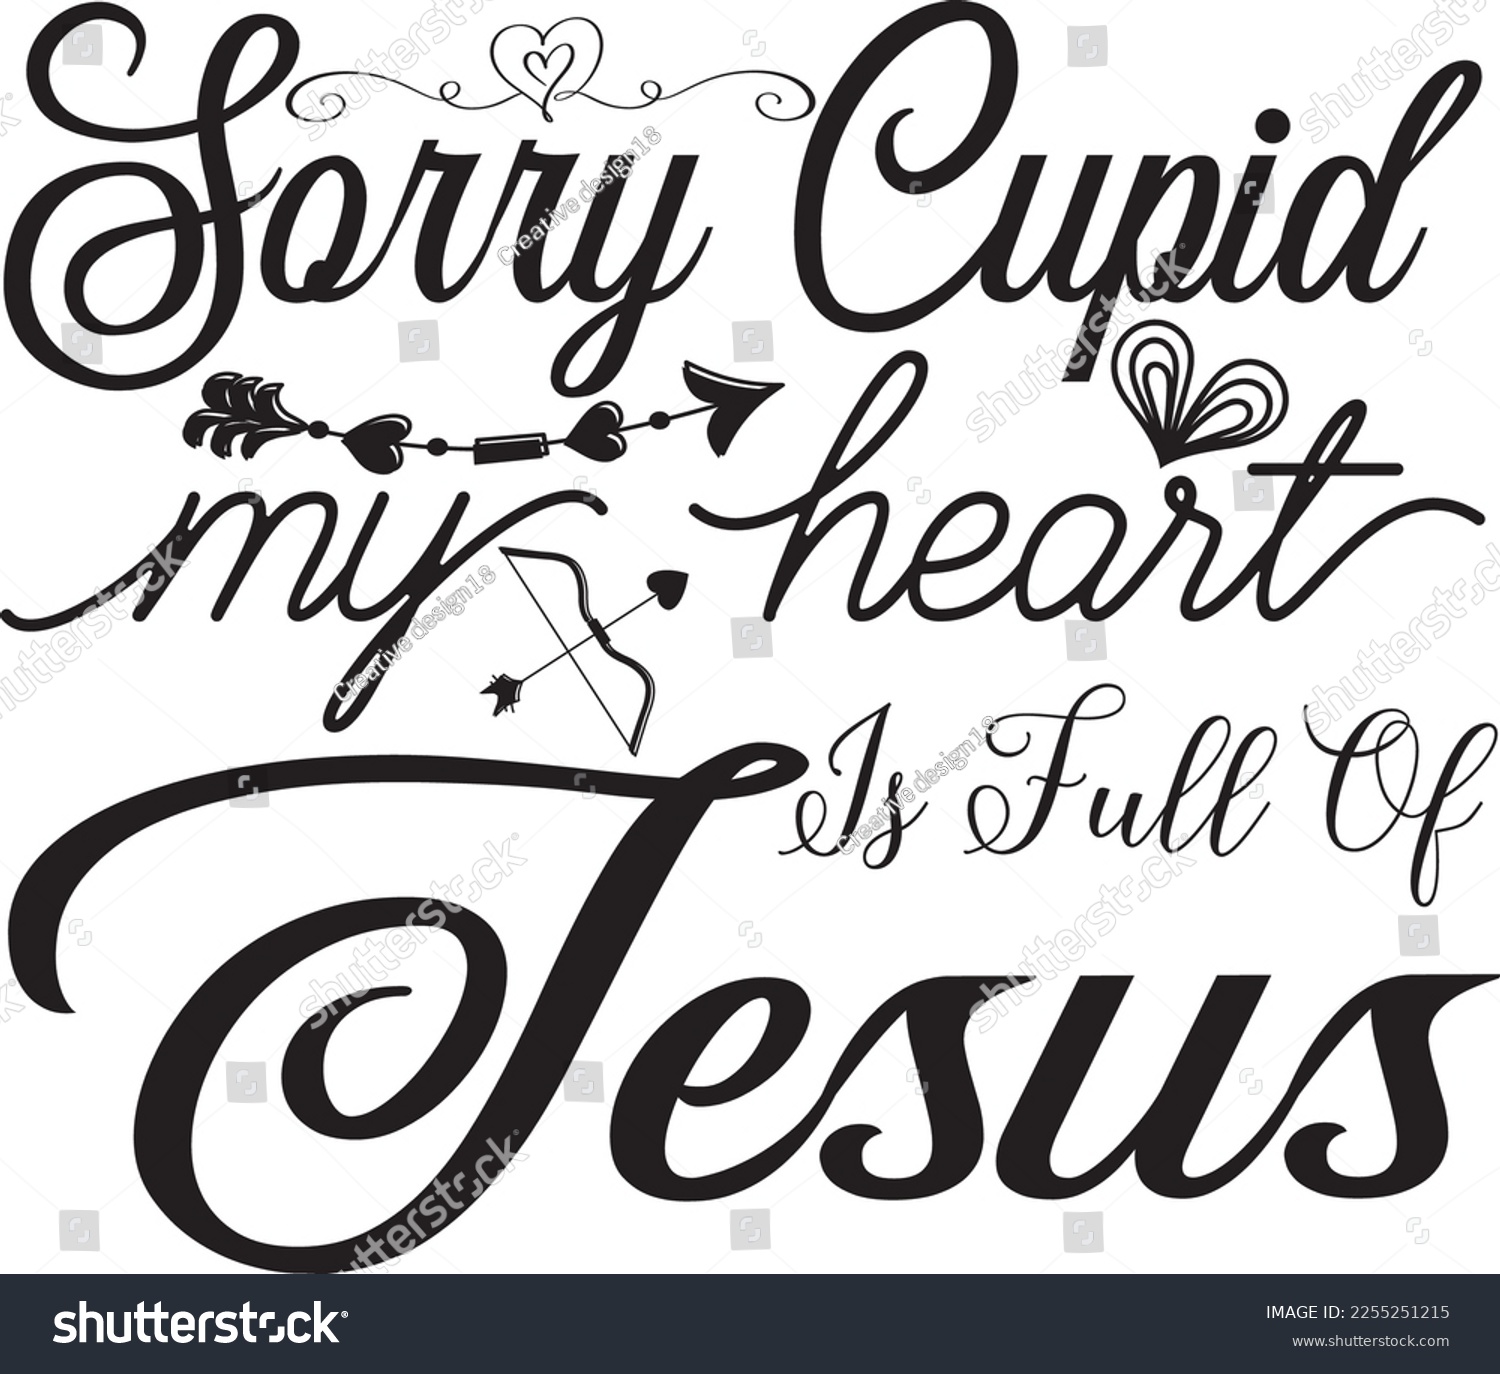 SVG of 
Sorry Cupid My Heart is Full of Jesus svg